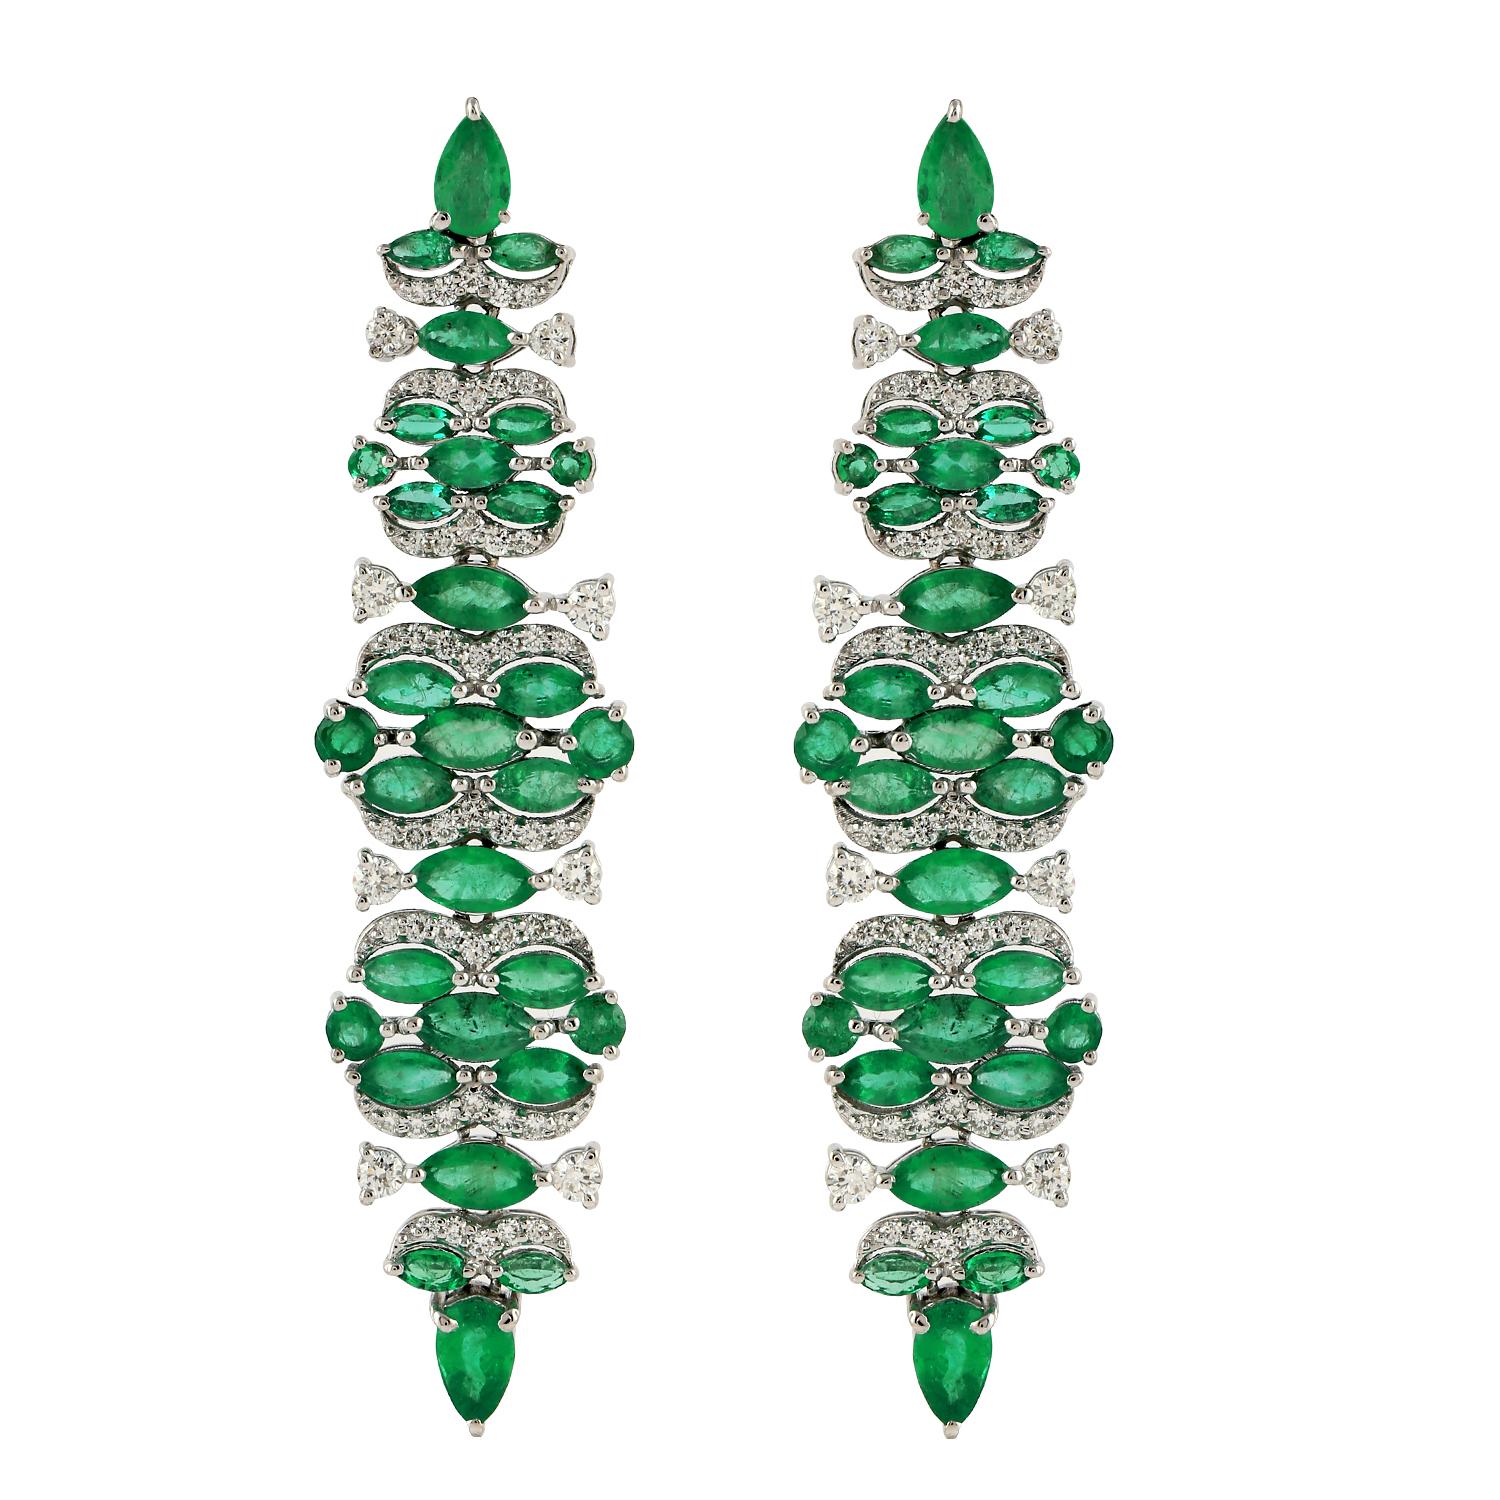 Emerald Long Dangle Earrings With Diamonds Made In 14k White Gold